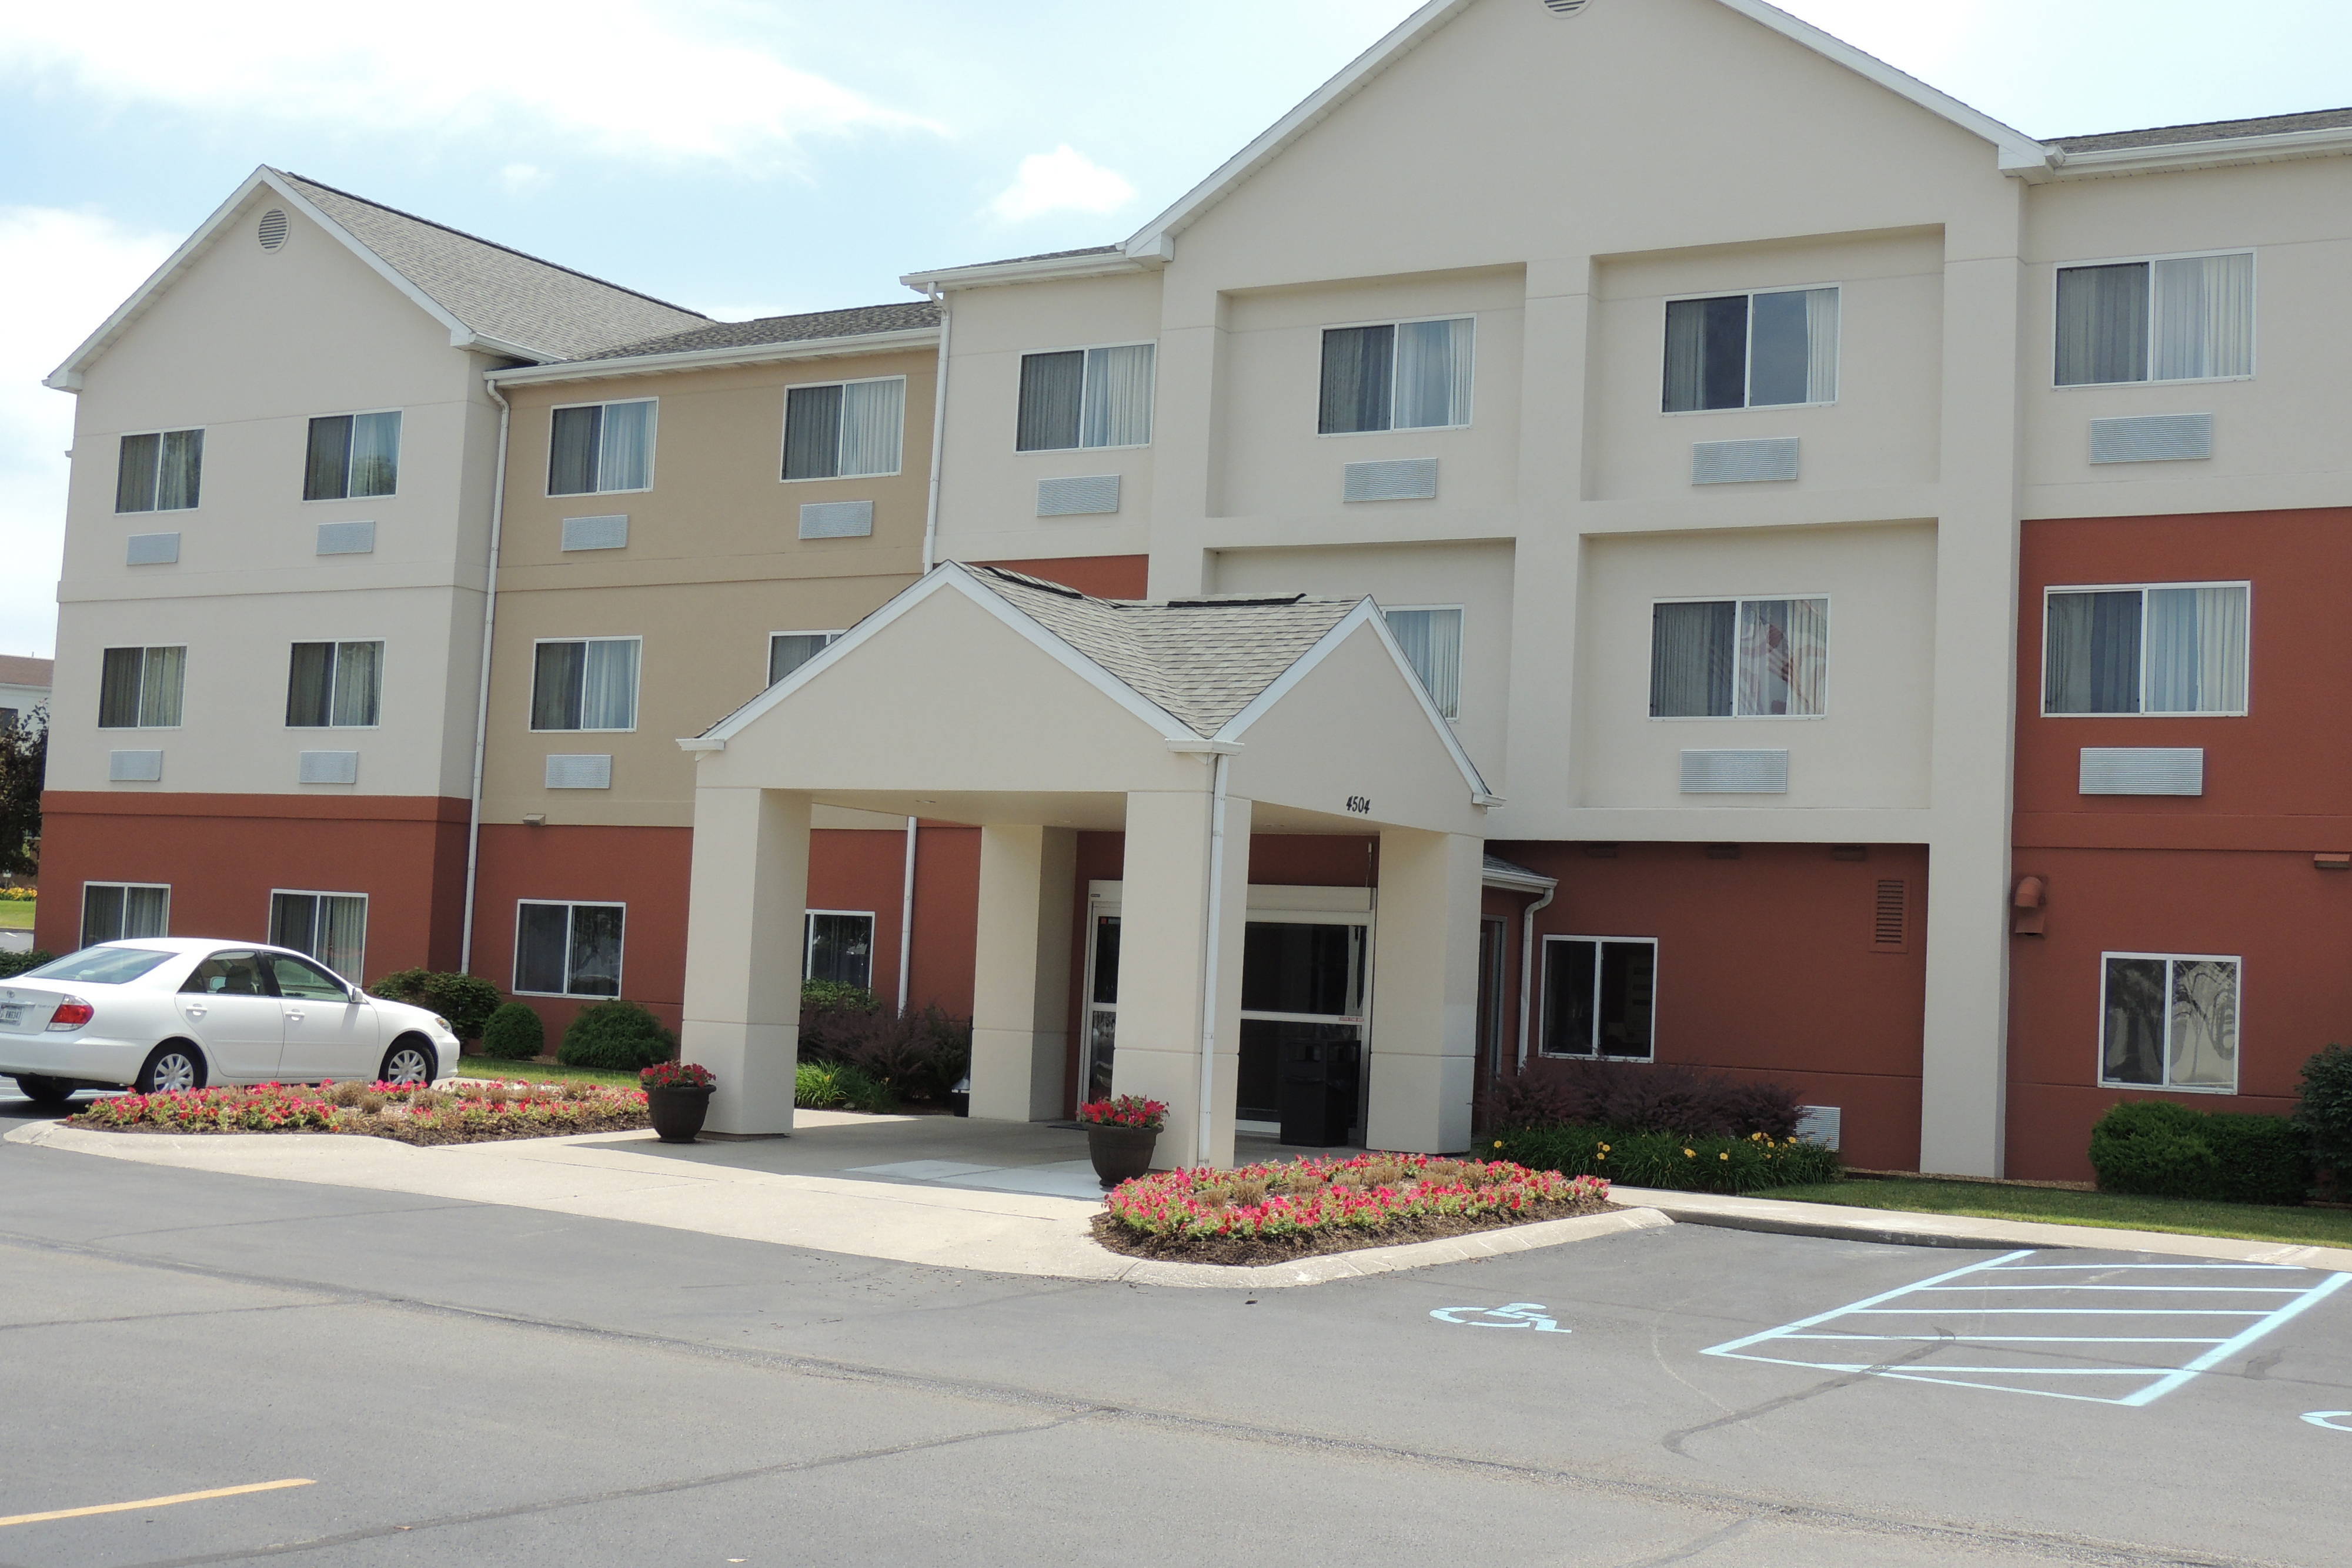 Photo of Fairfield Inn Indianapolis South, Indianapolis, IN